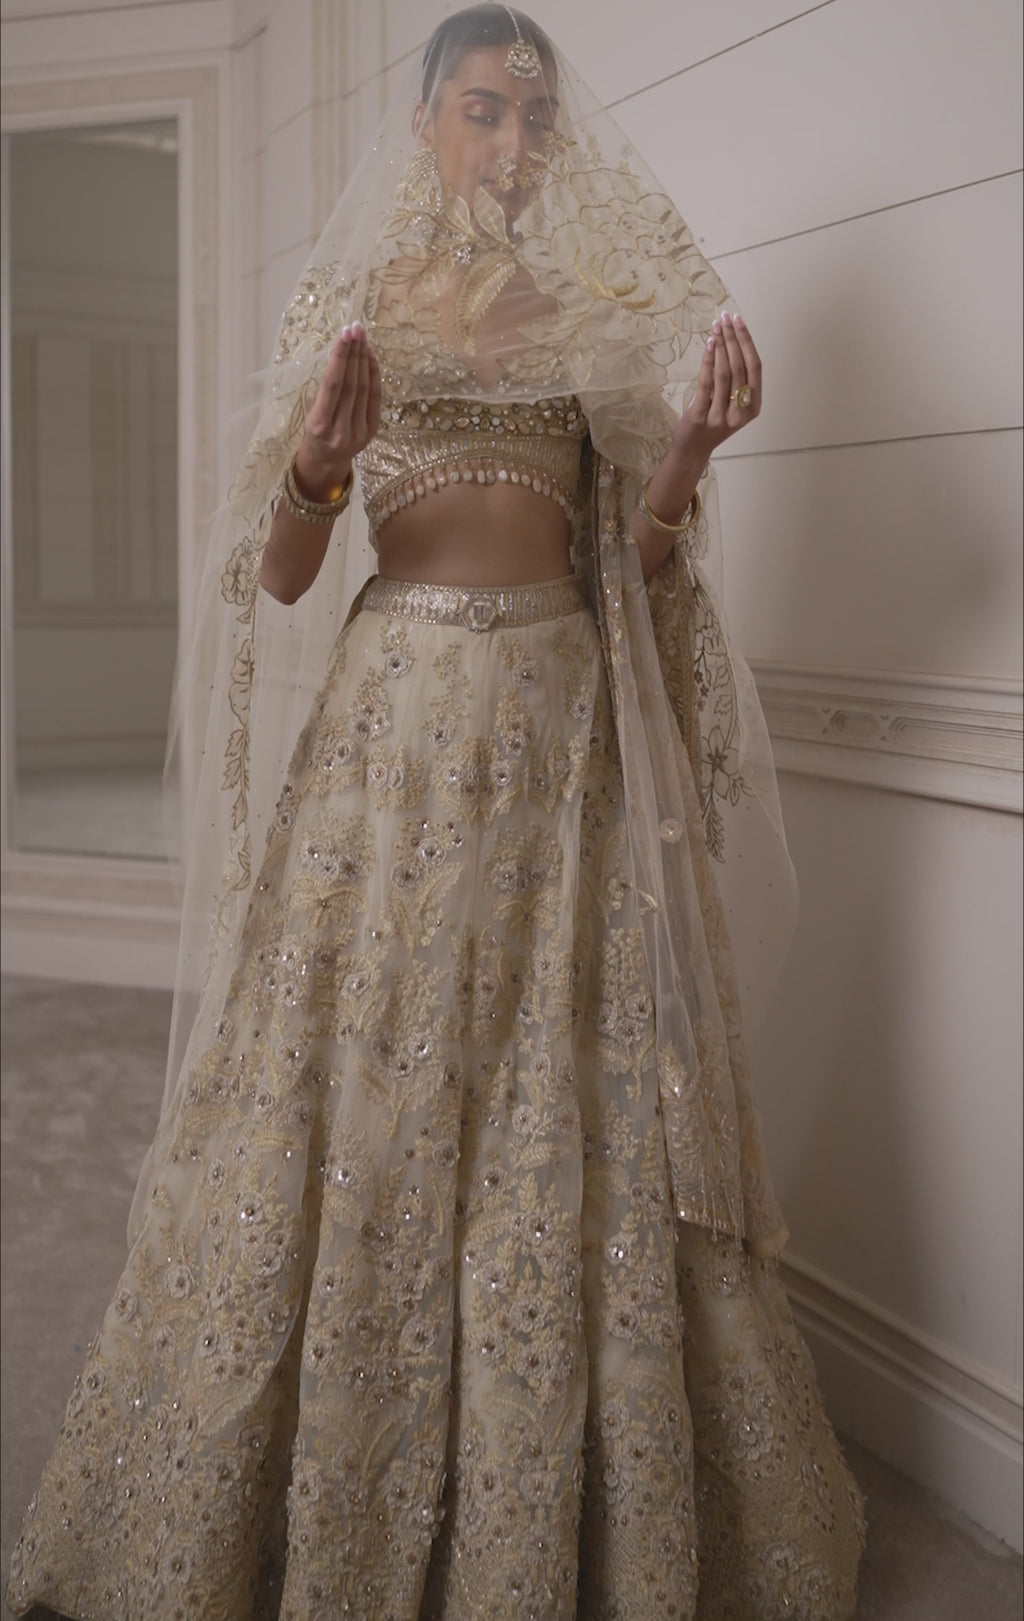 Tarun Tahiliani - The new Ready-To-Wear collection exudes... | Facebook